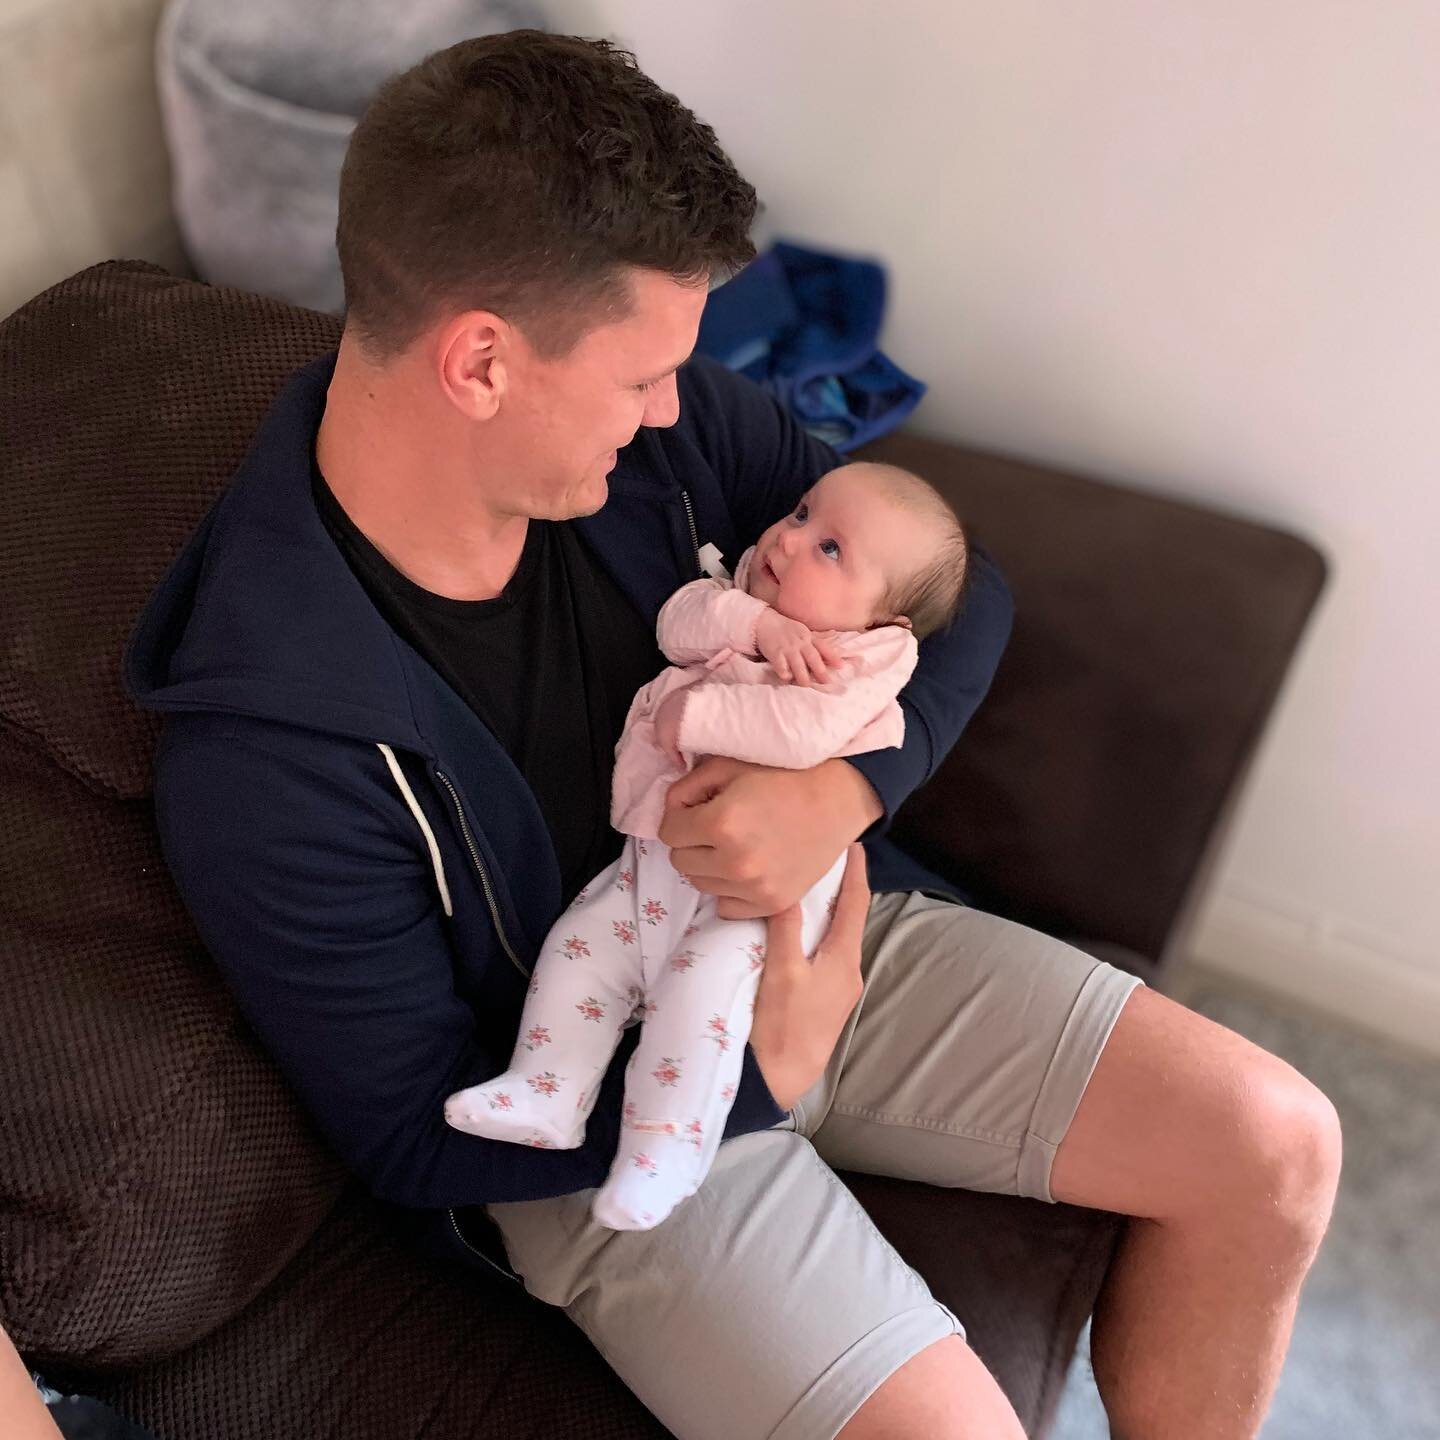 Finally got to hold my 10 week old niece, Darcie... what a little beaut 😍 #funcle #hunkle #ijoke